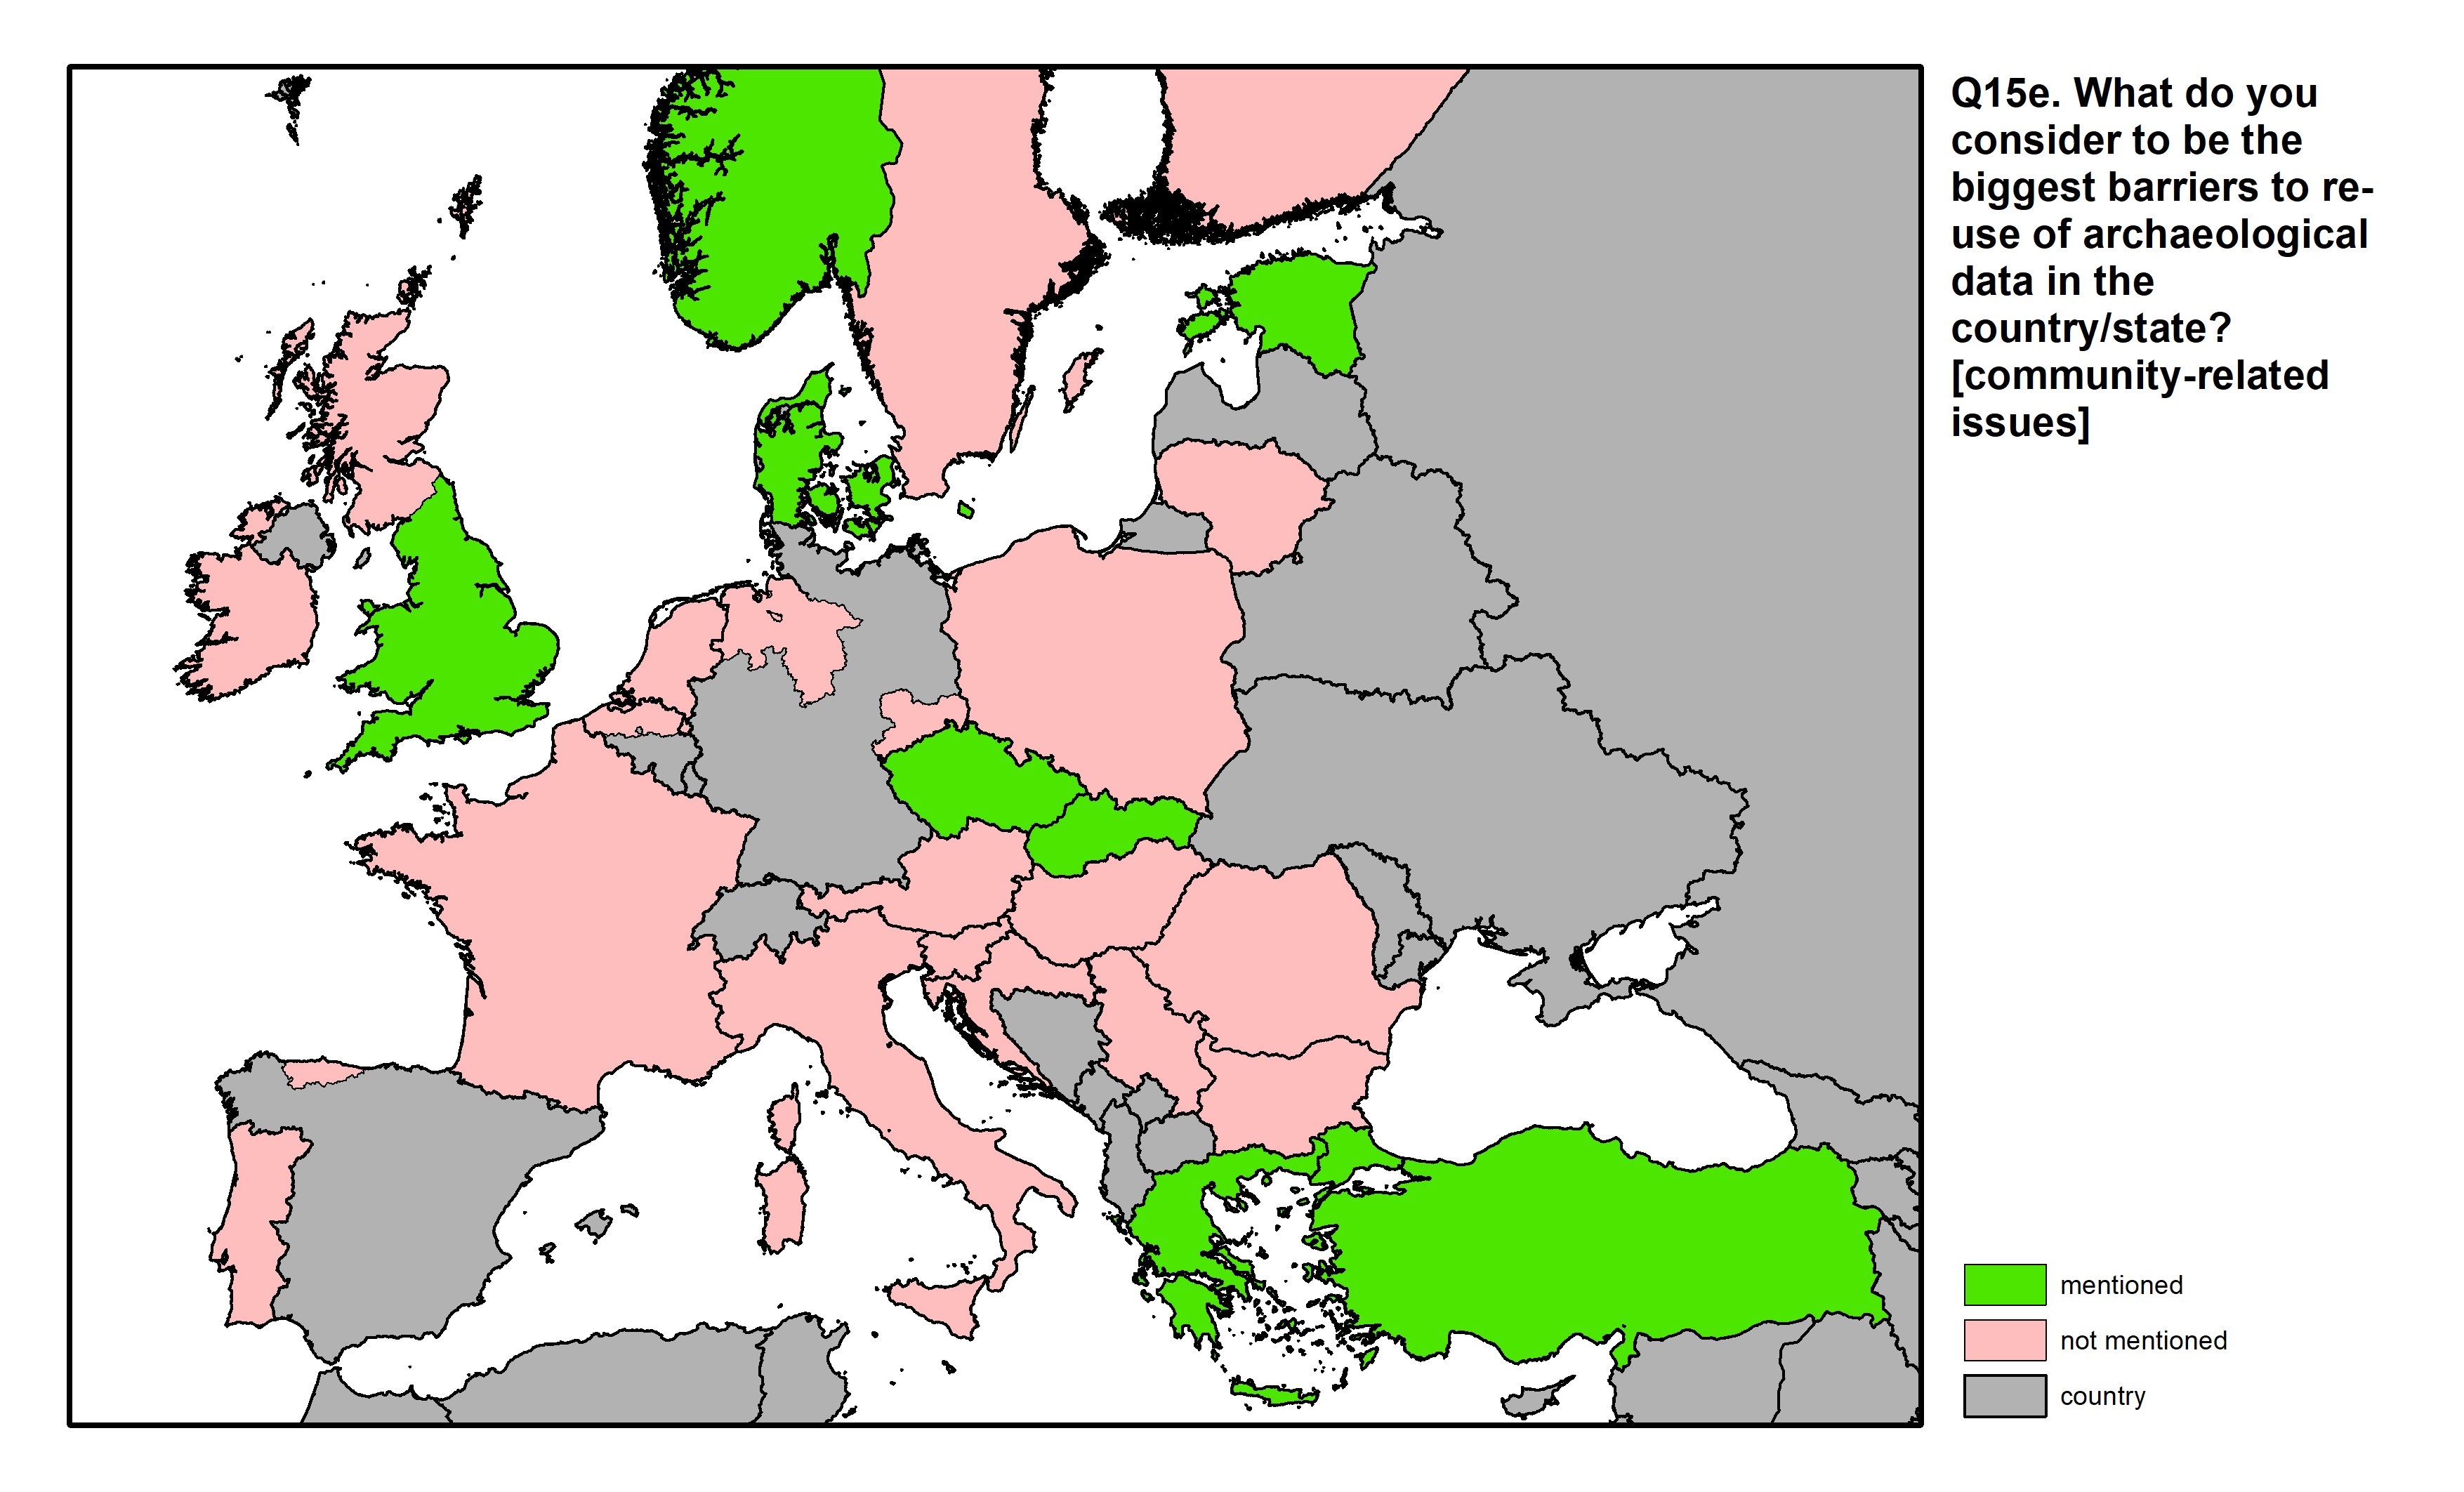 Figure 53: a map of Europe showing countries and regions in colour based on response rates to the survey question.